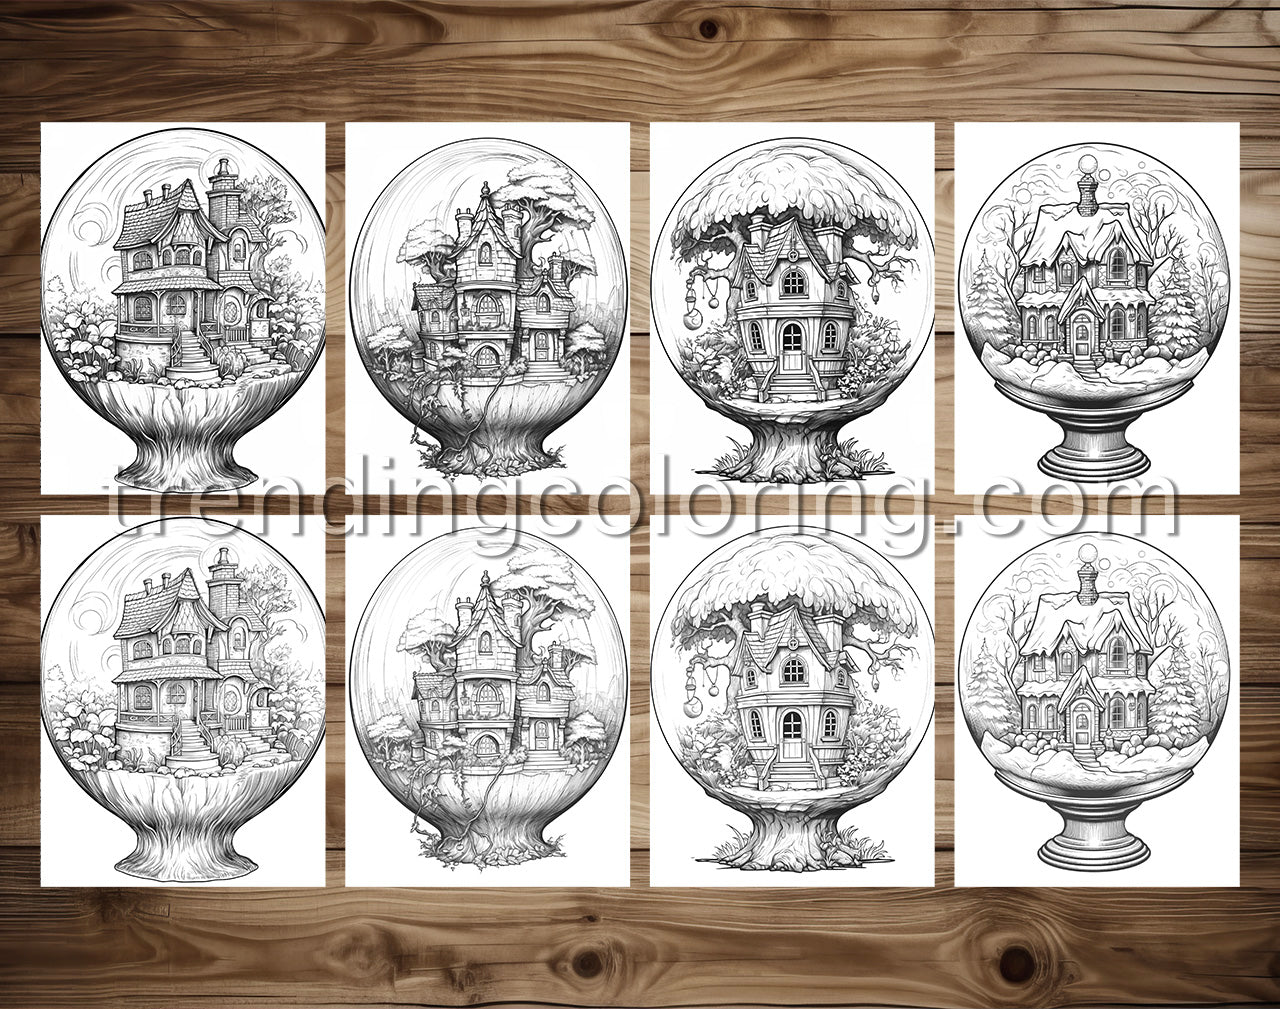 25 Fairy House In Magic Ball Grayscale Coloring Pages - Instant Download - Printable PDF Dark/Light